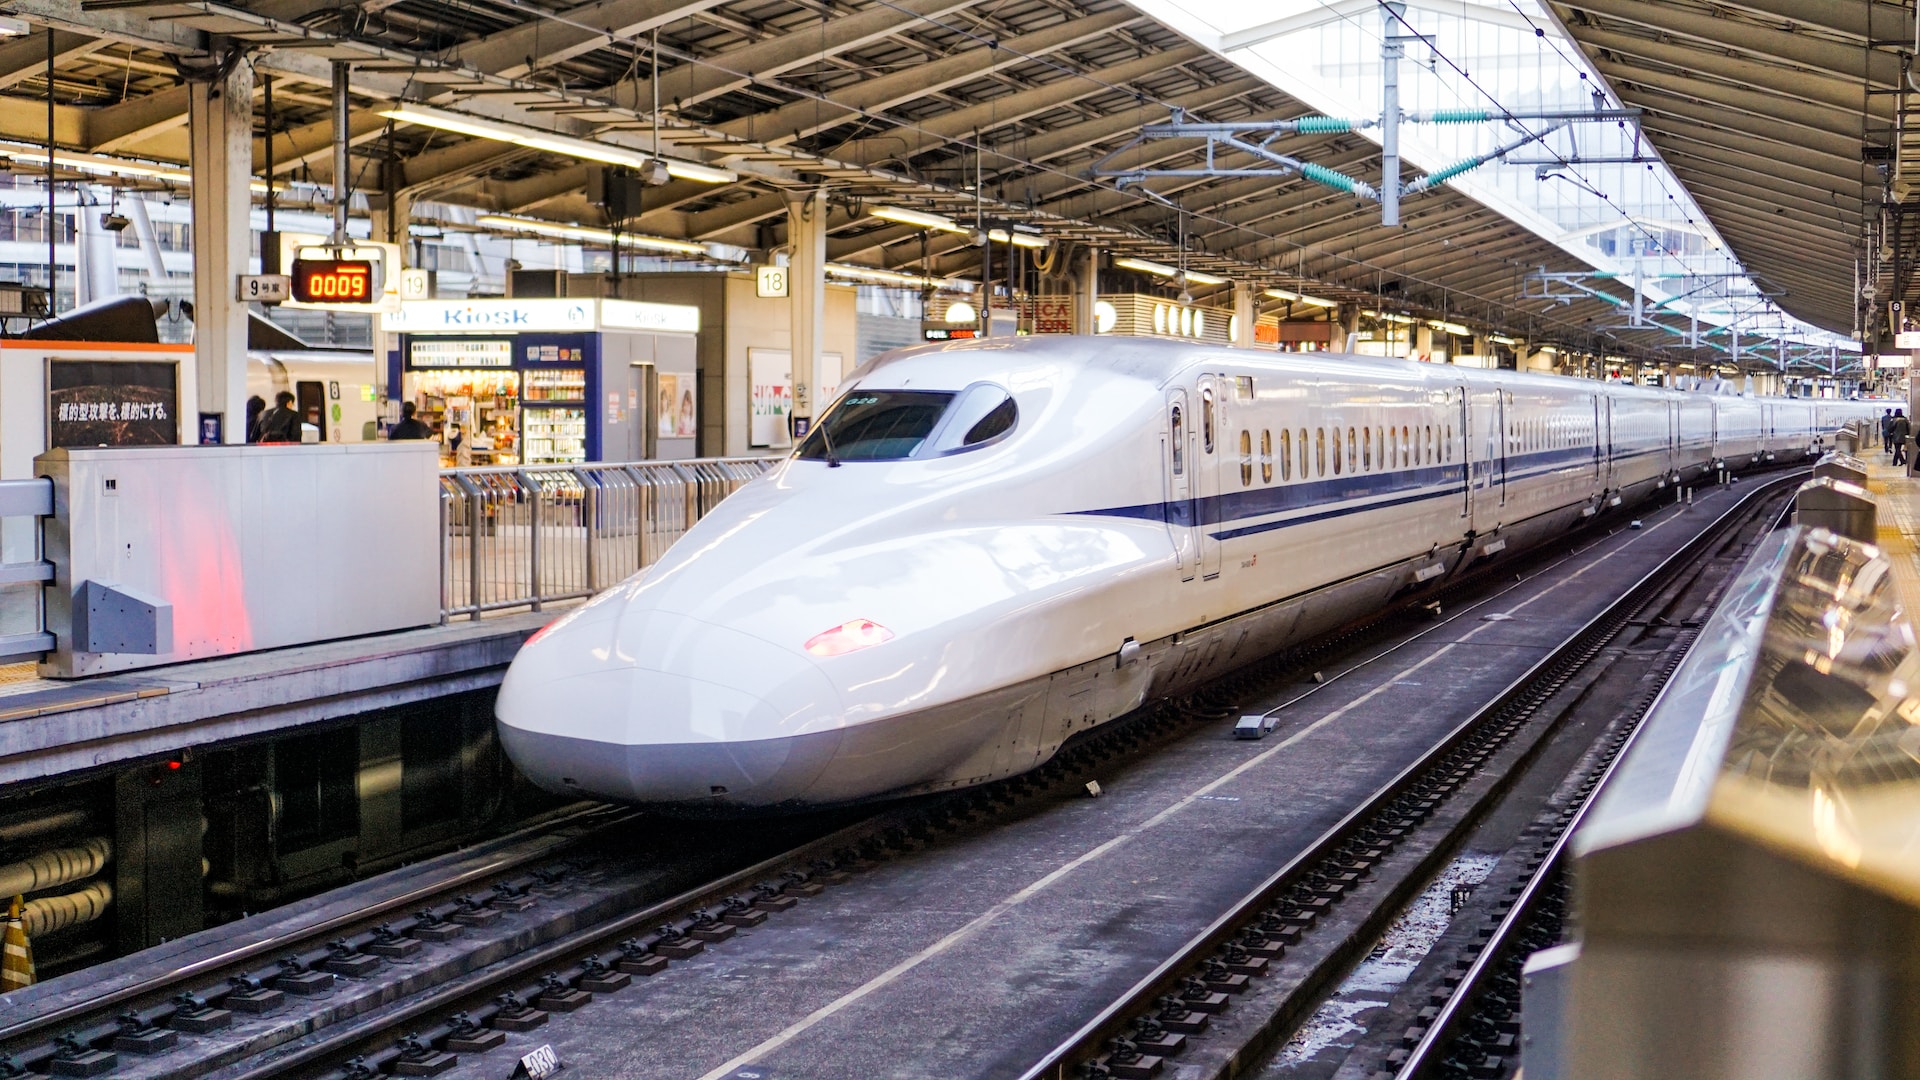 High speed train illustrating how effective impactful teams can be - Photo by Fikri Rasyid